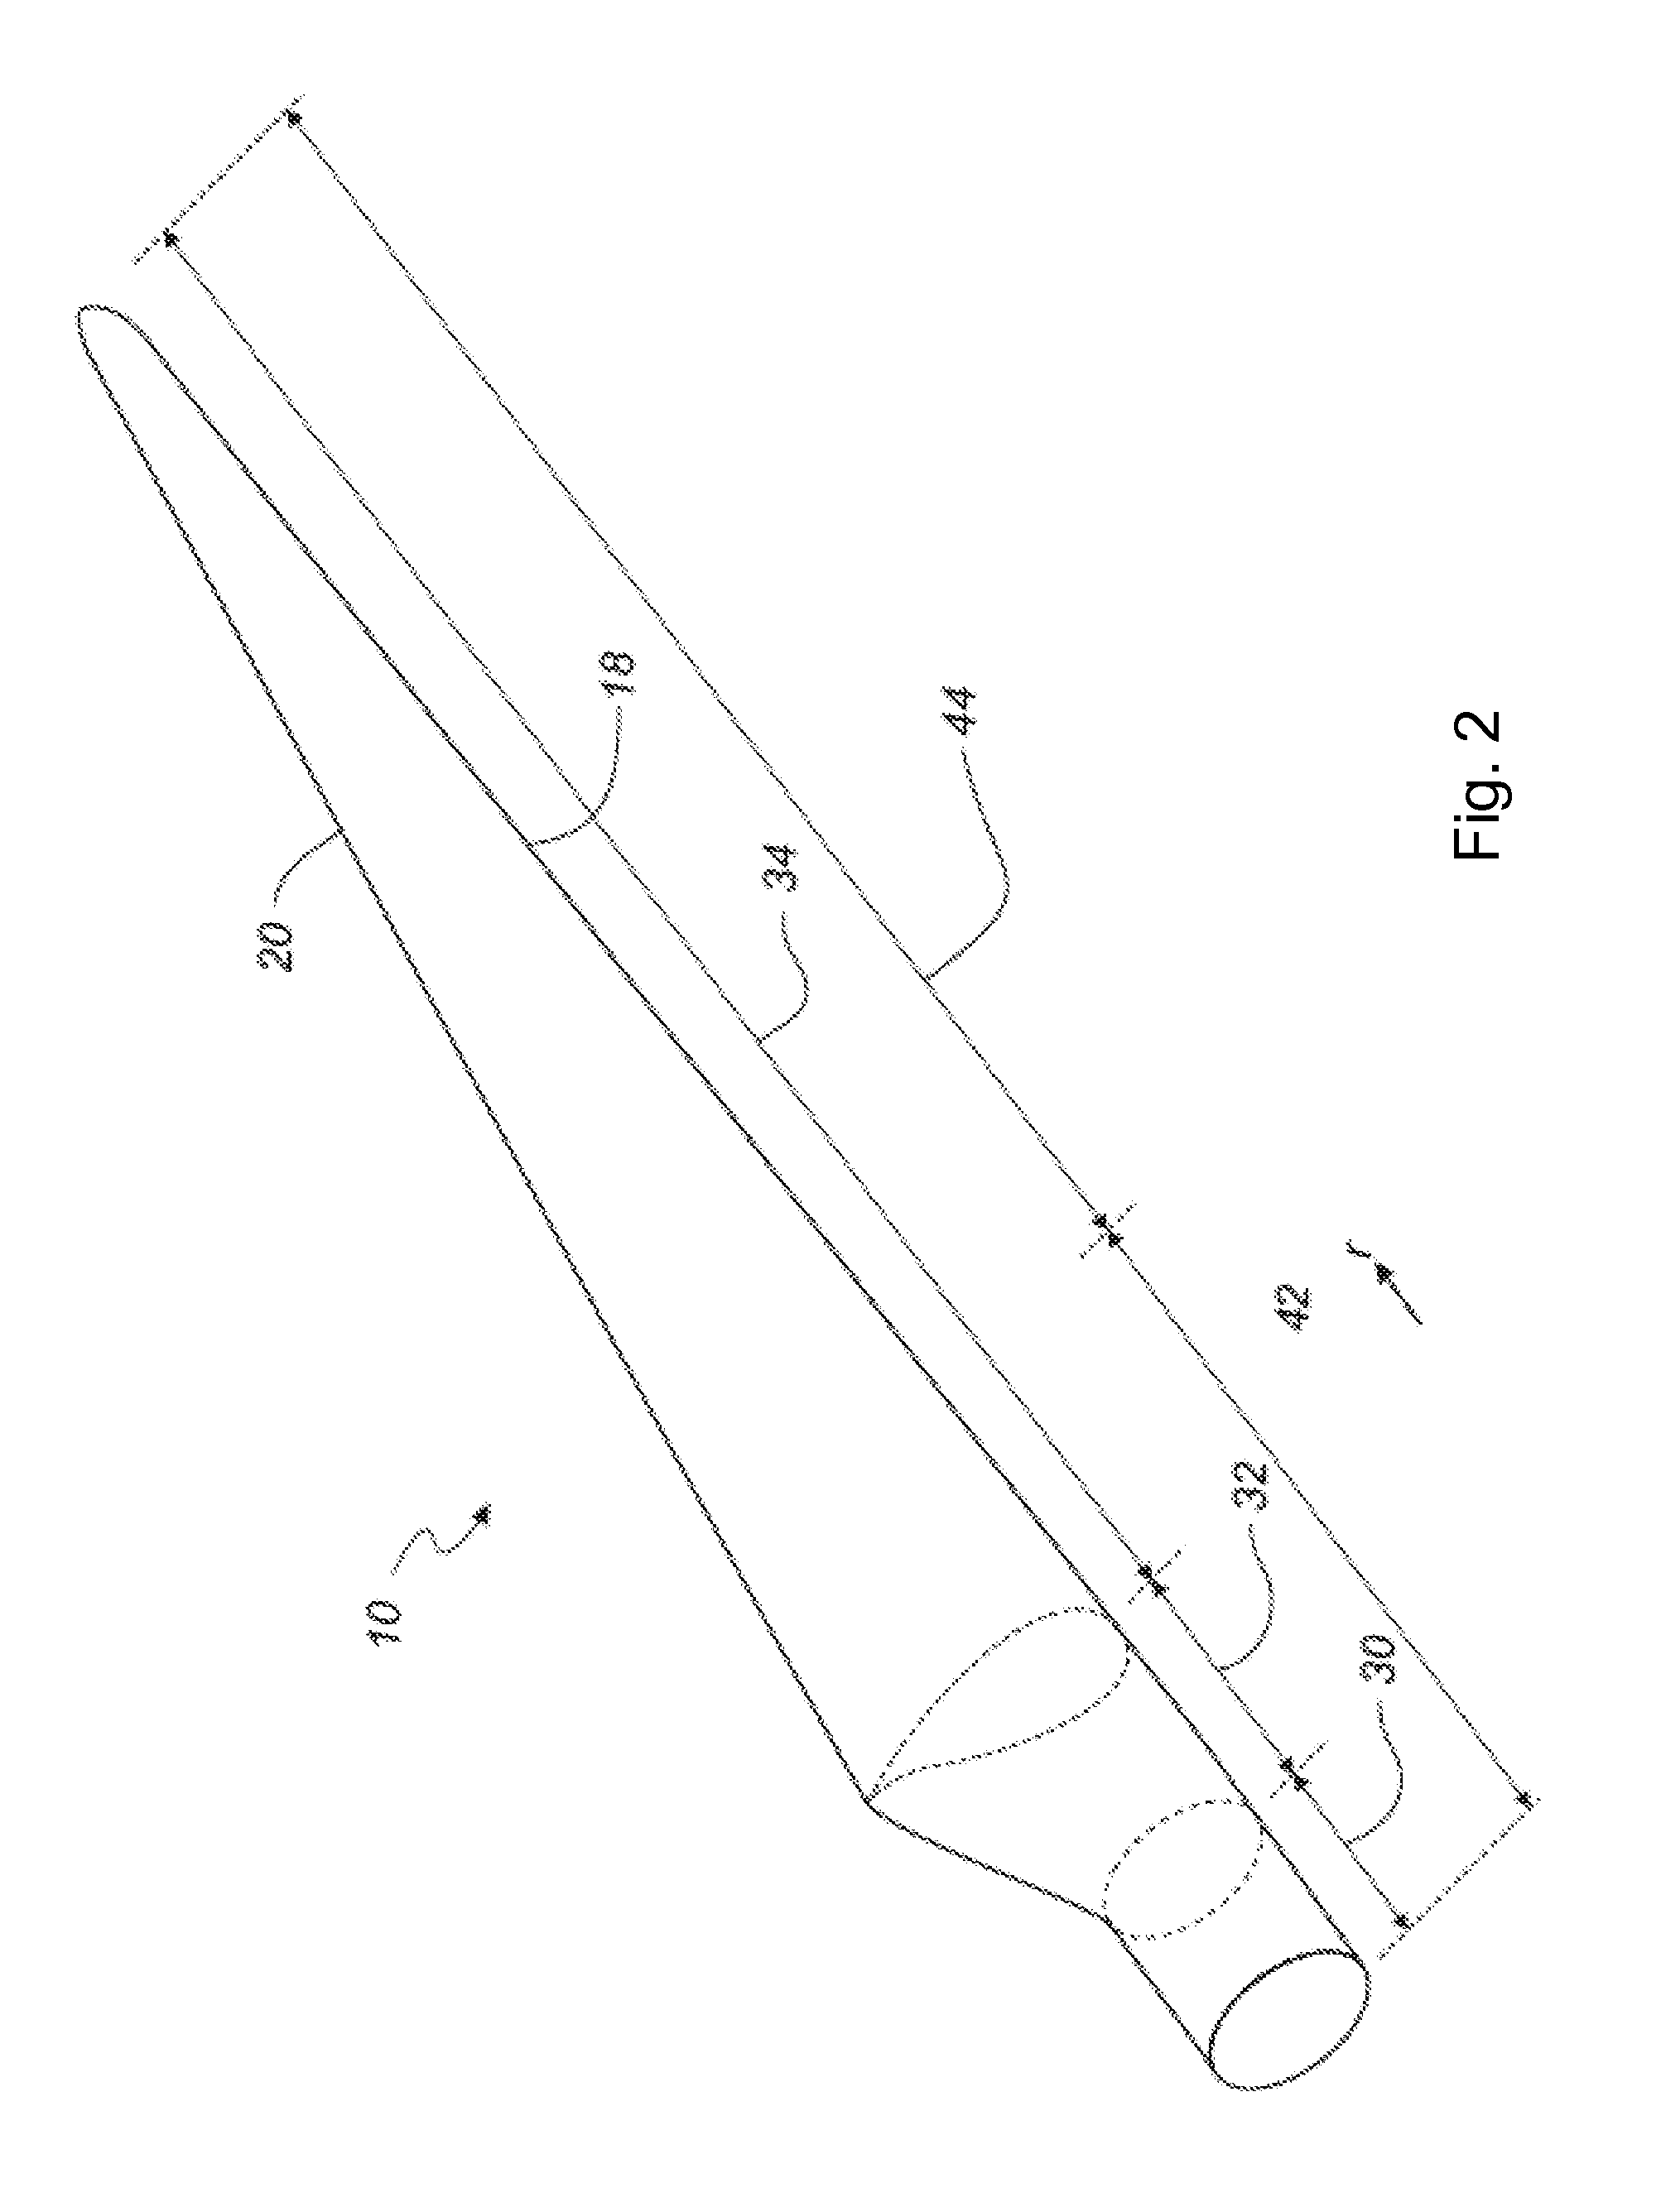 System and method for manufacturing a wind turbine blade